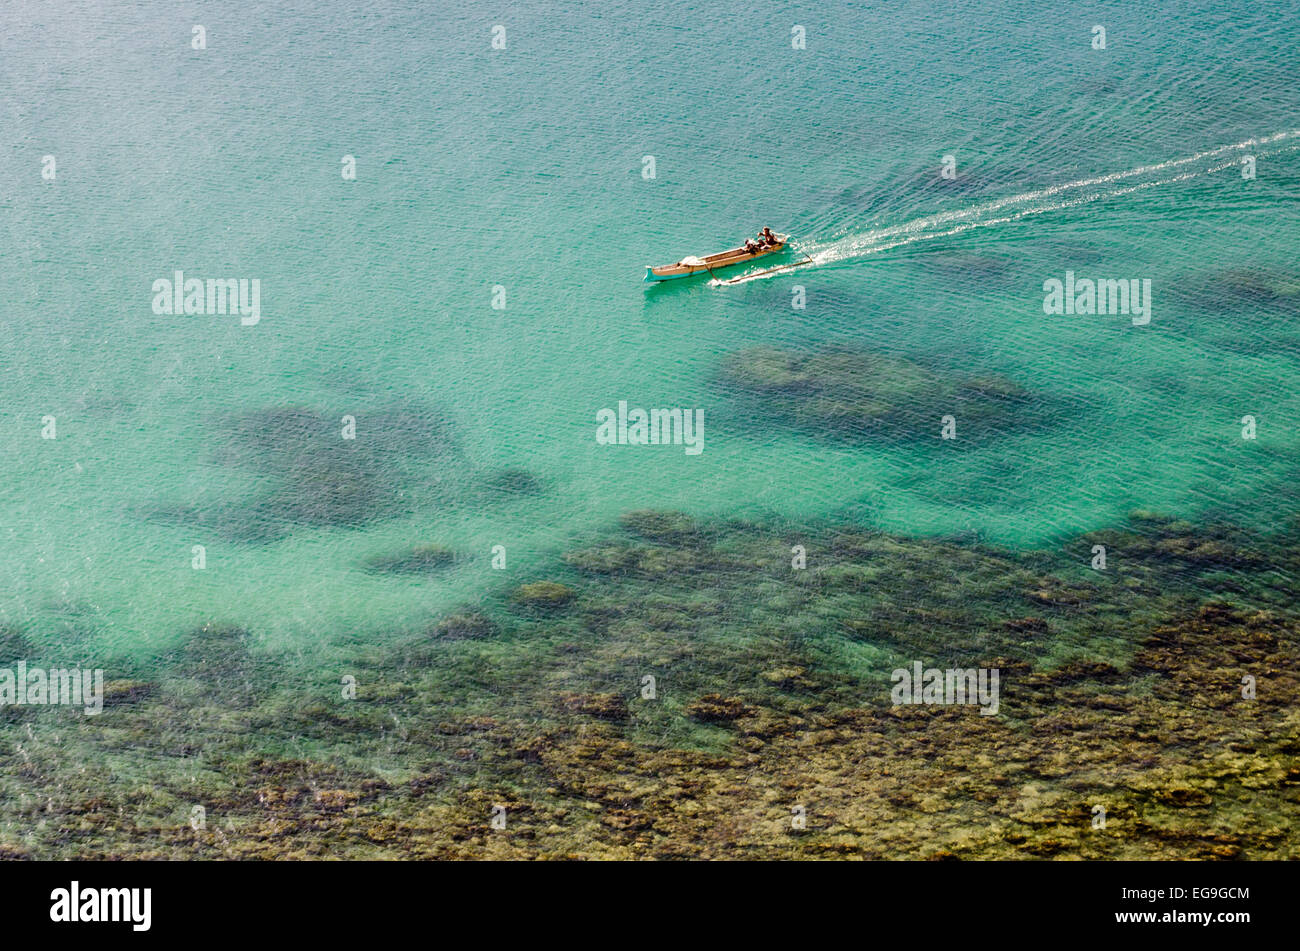 Indonesia, Lombok, High angle view of fishing boat in sea Stock Photo